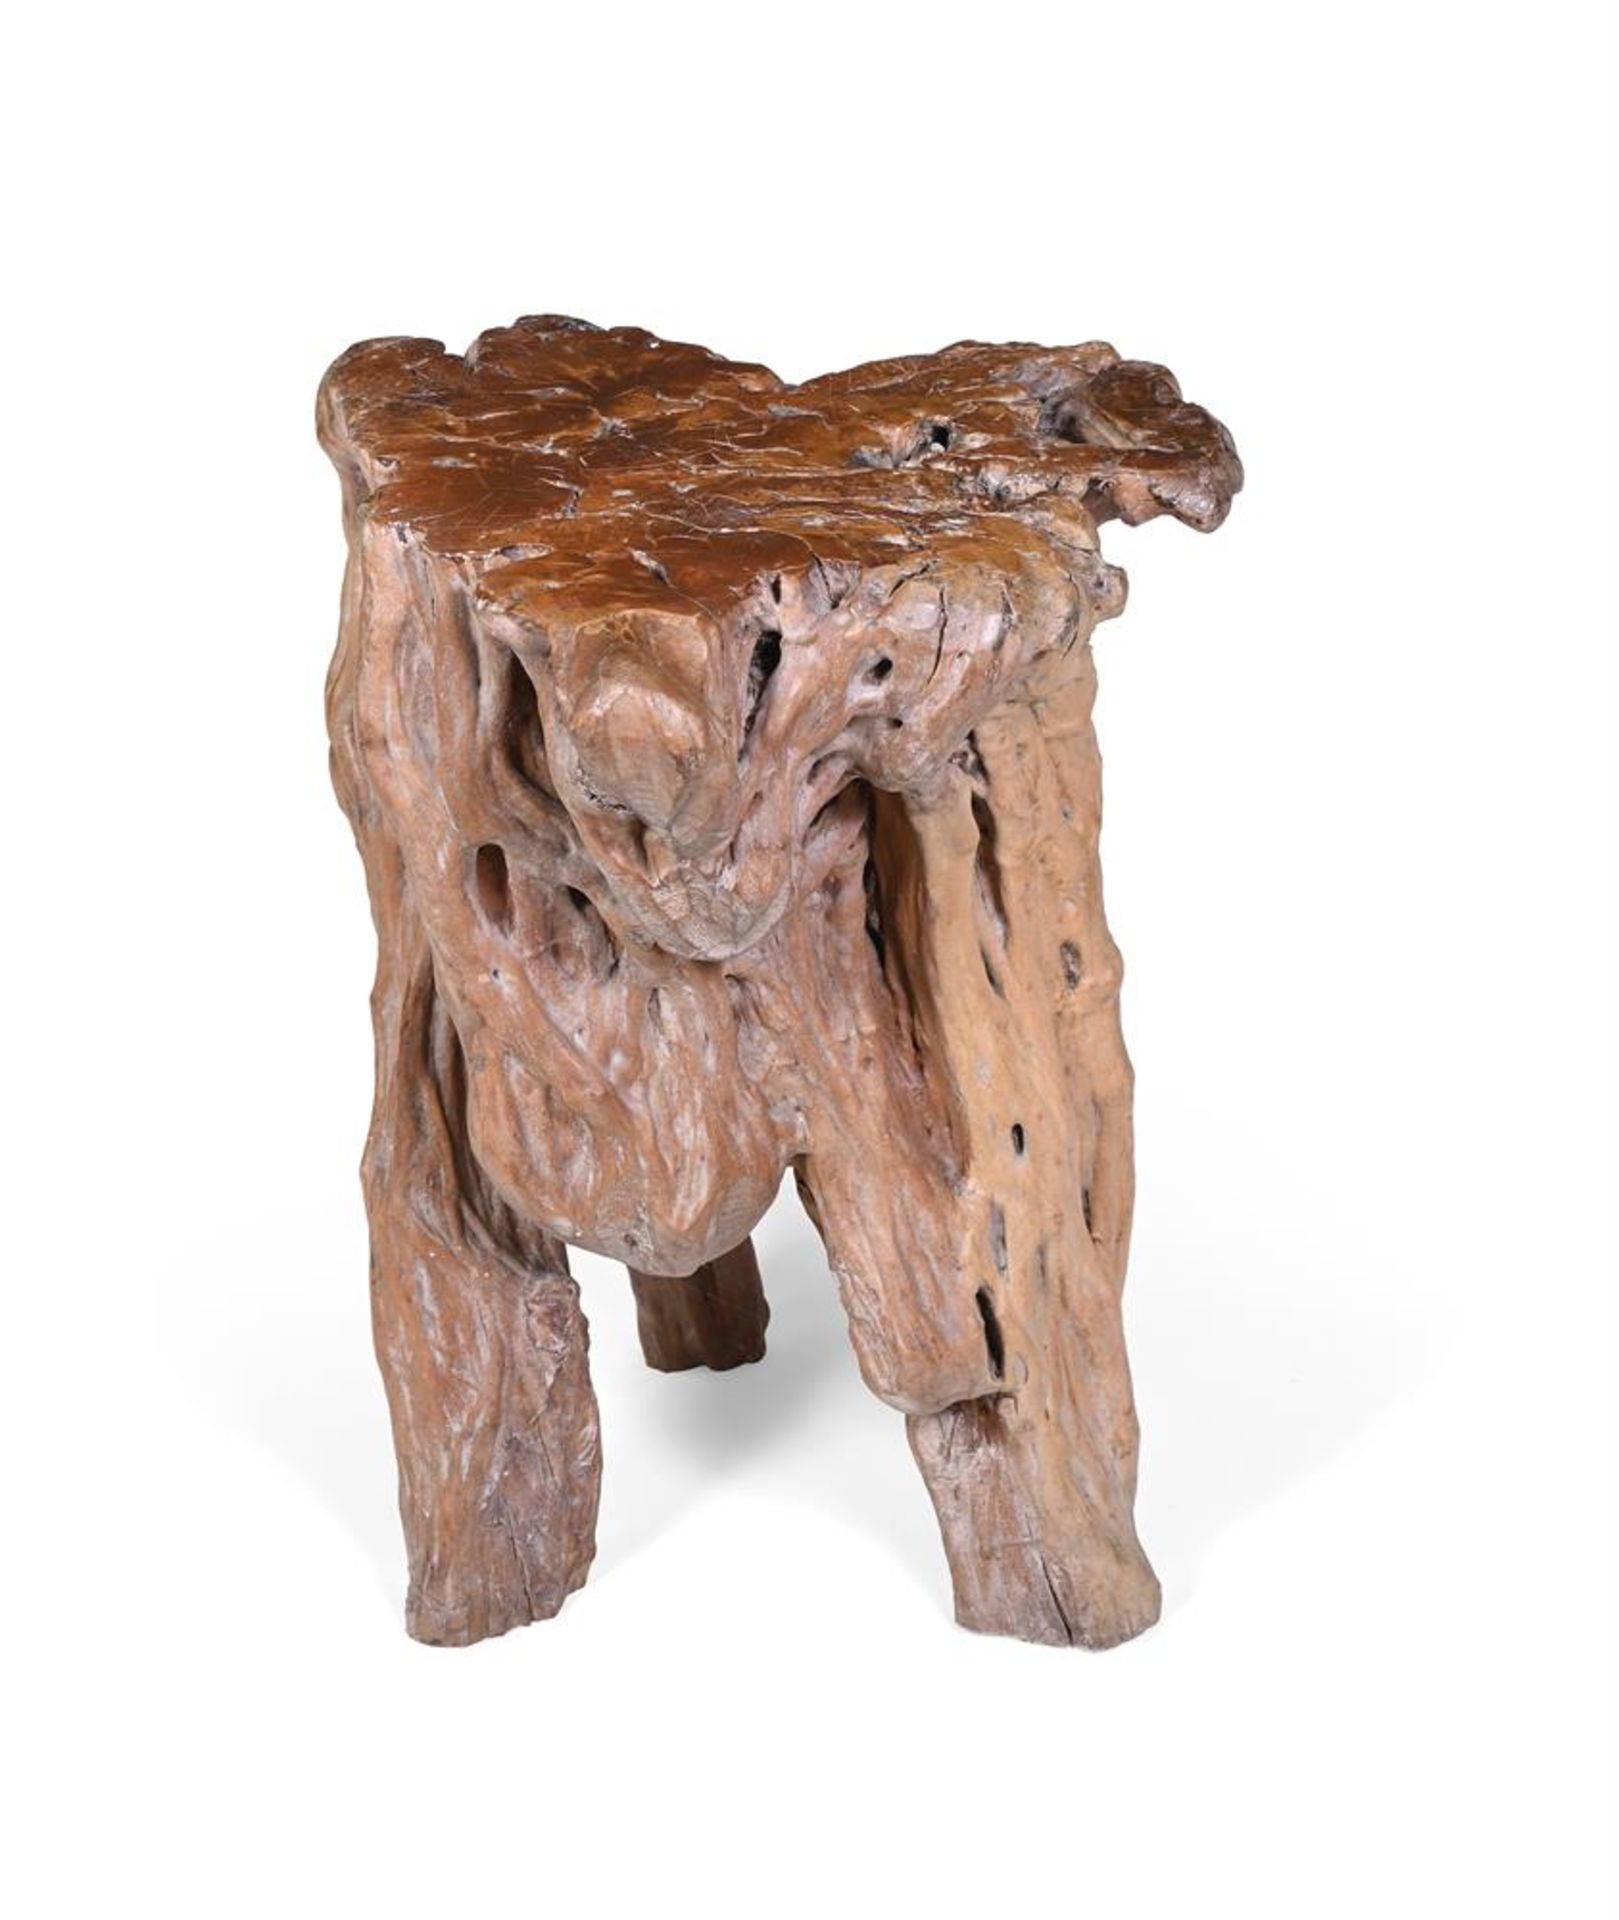 A RUSTIC TABLE FORMED FROM A TREE ROOT, 19TH/ 20TH CENTURY - Image 2 of 2